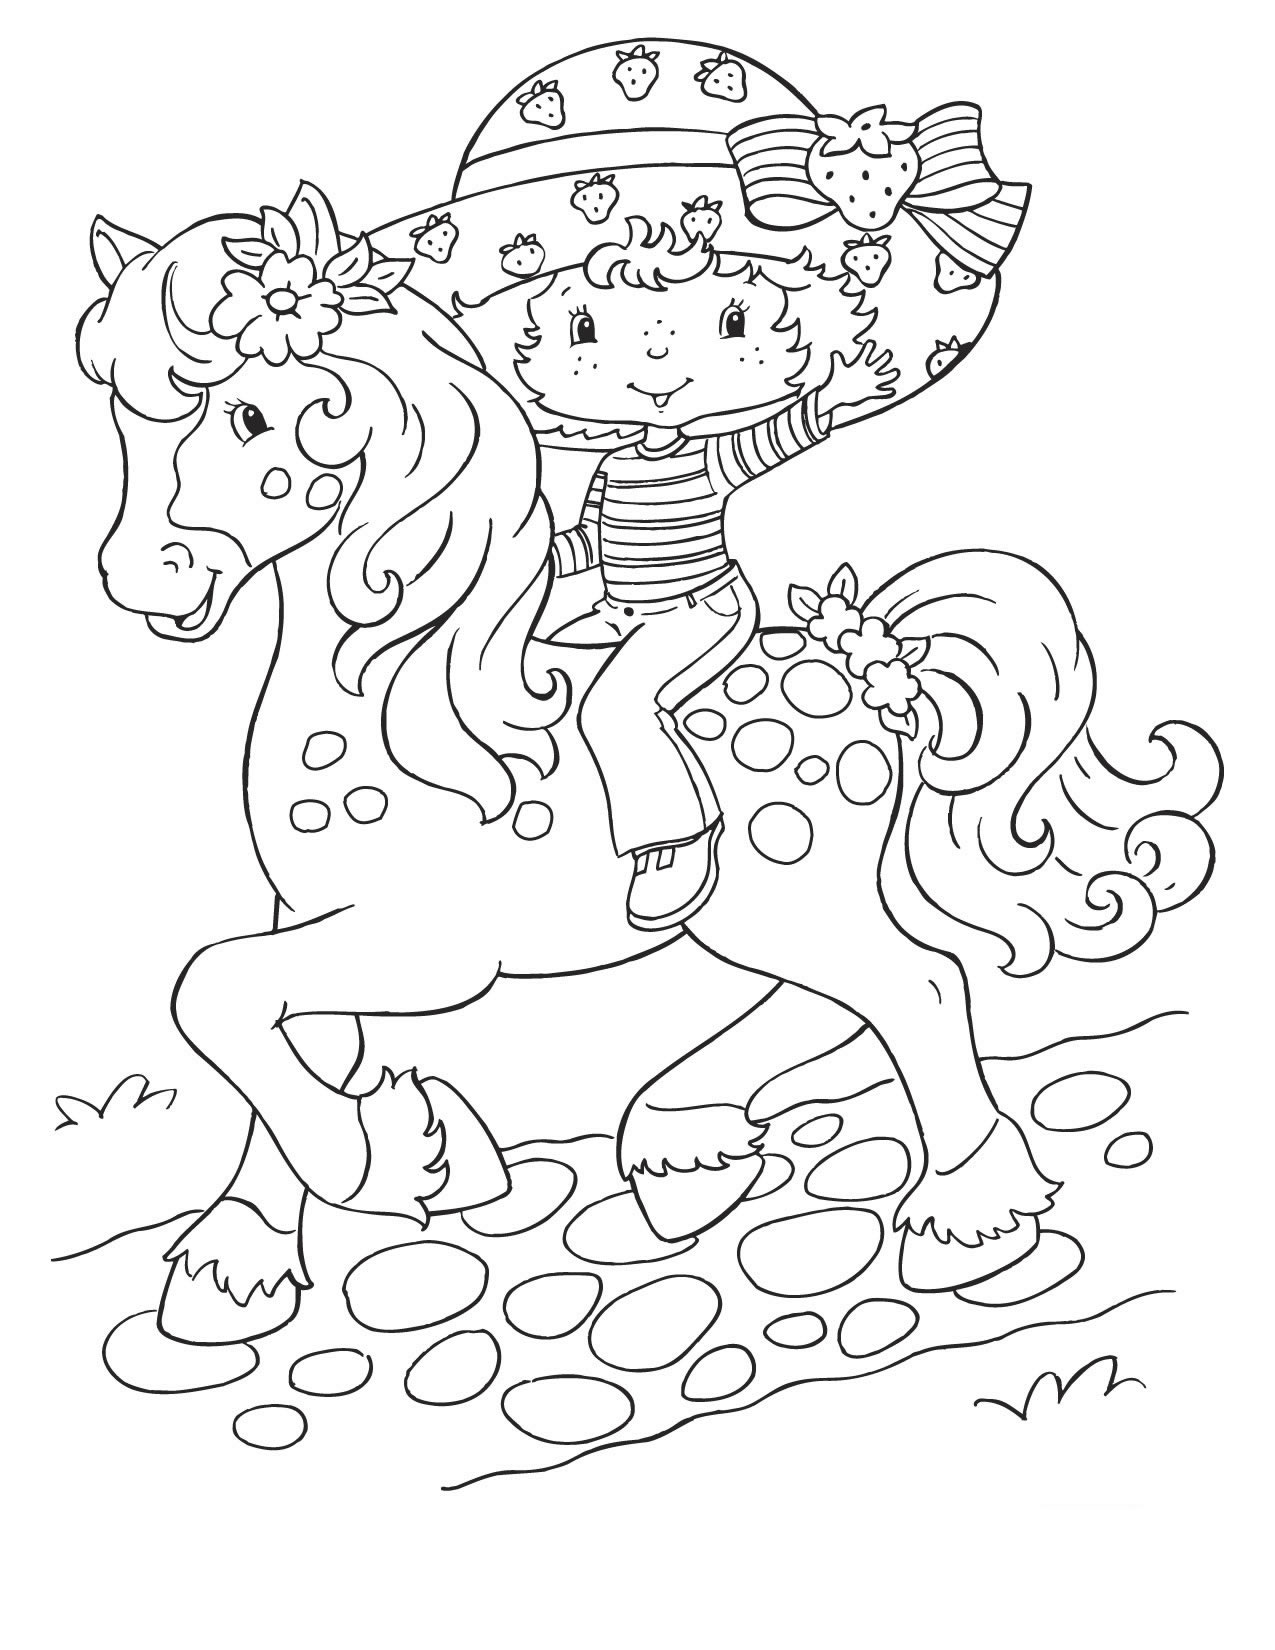 3 father 1 mother coloring pages